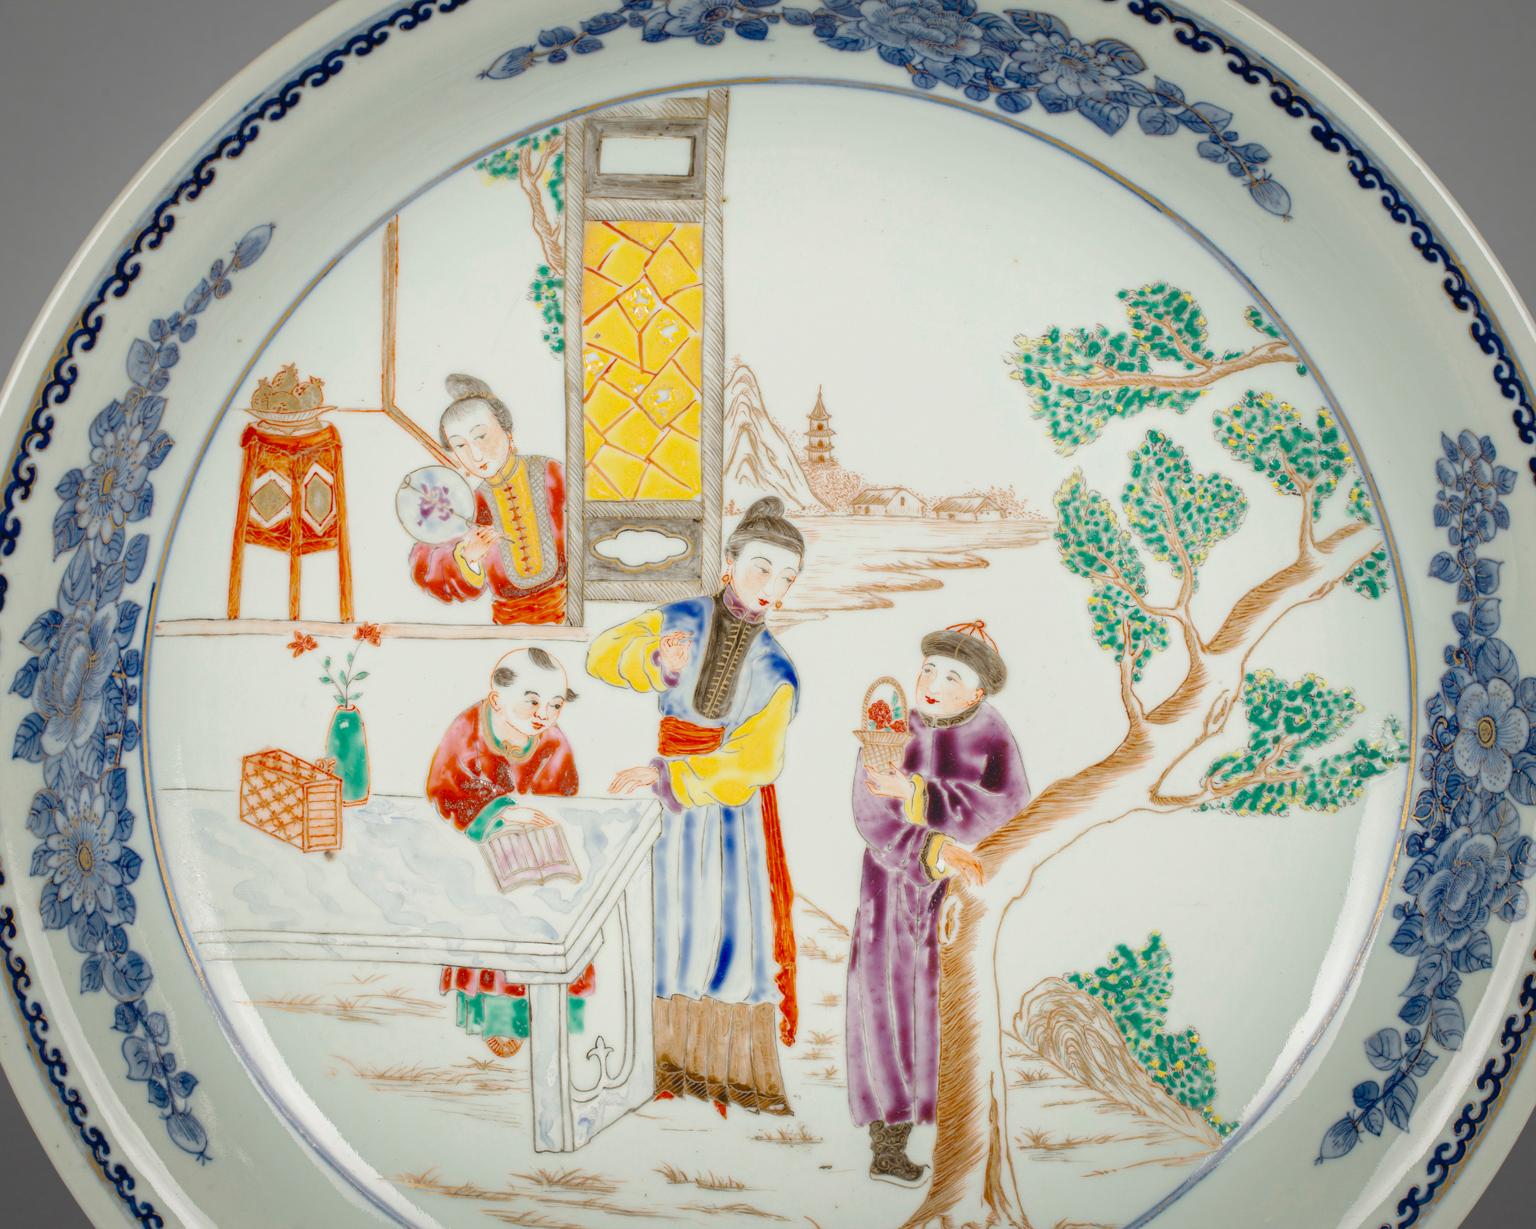 With figures in an outdoor setting, the wide everted border painted in underglaze blue with flowers and light gilding.